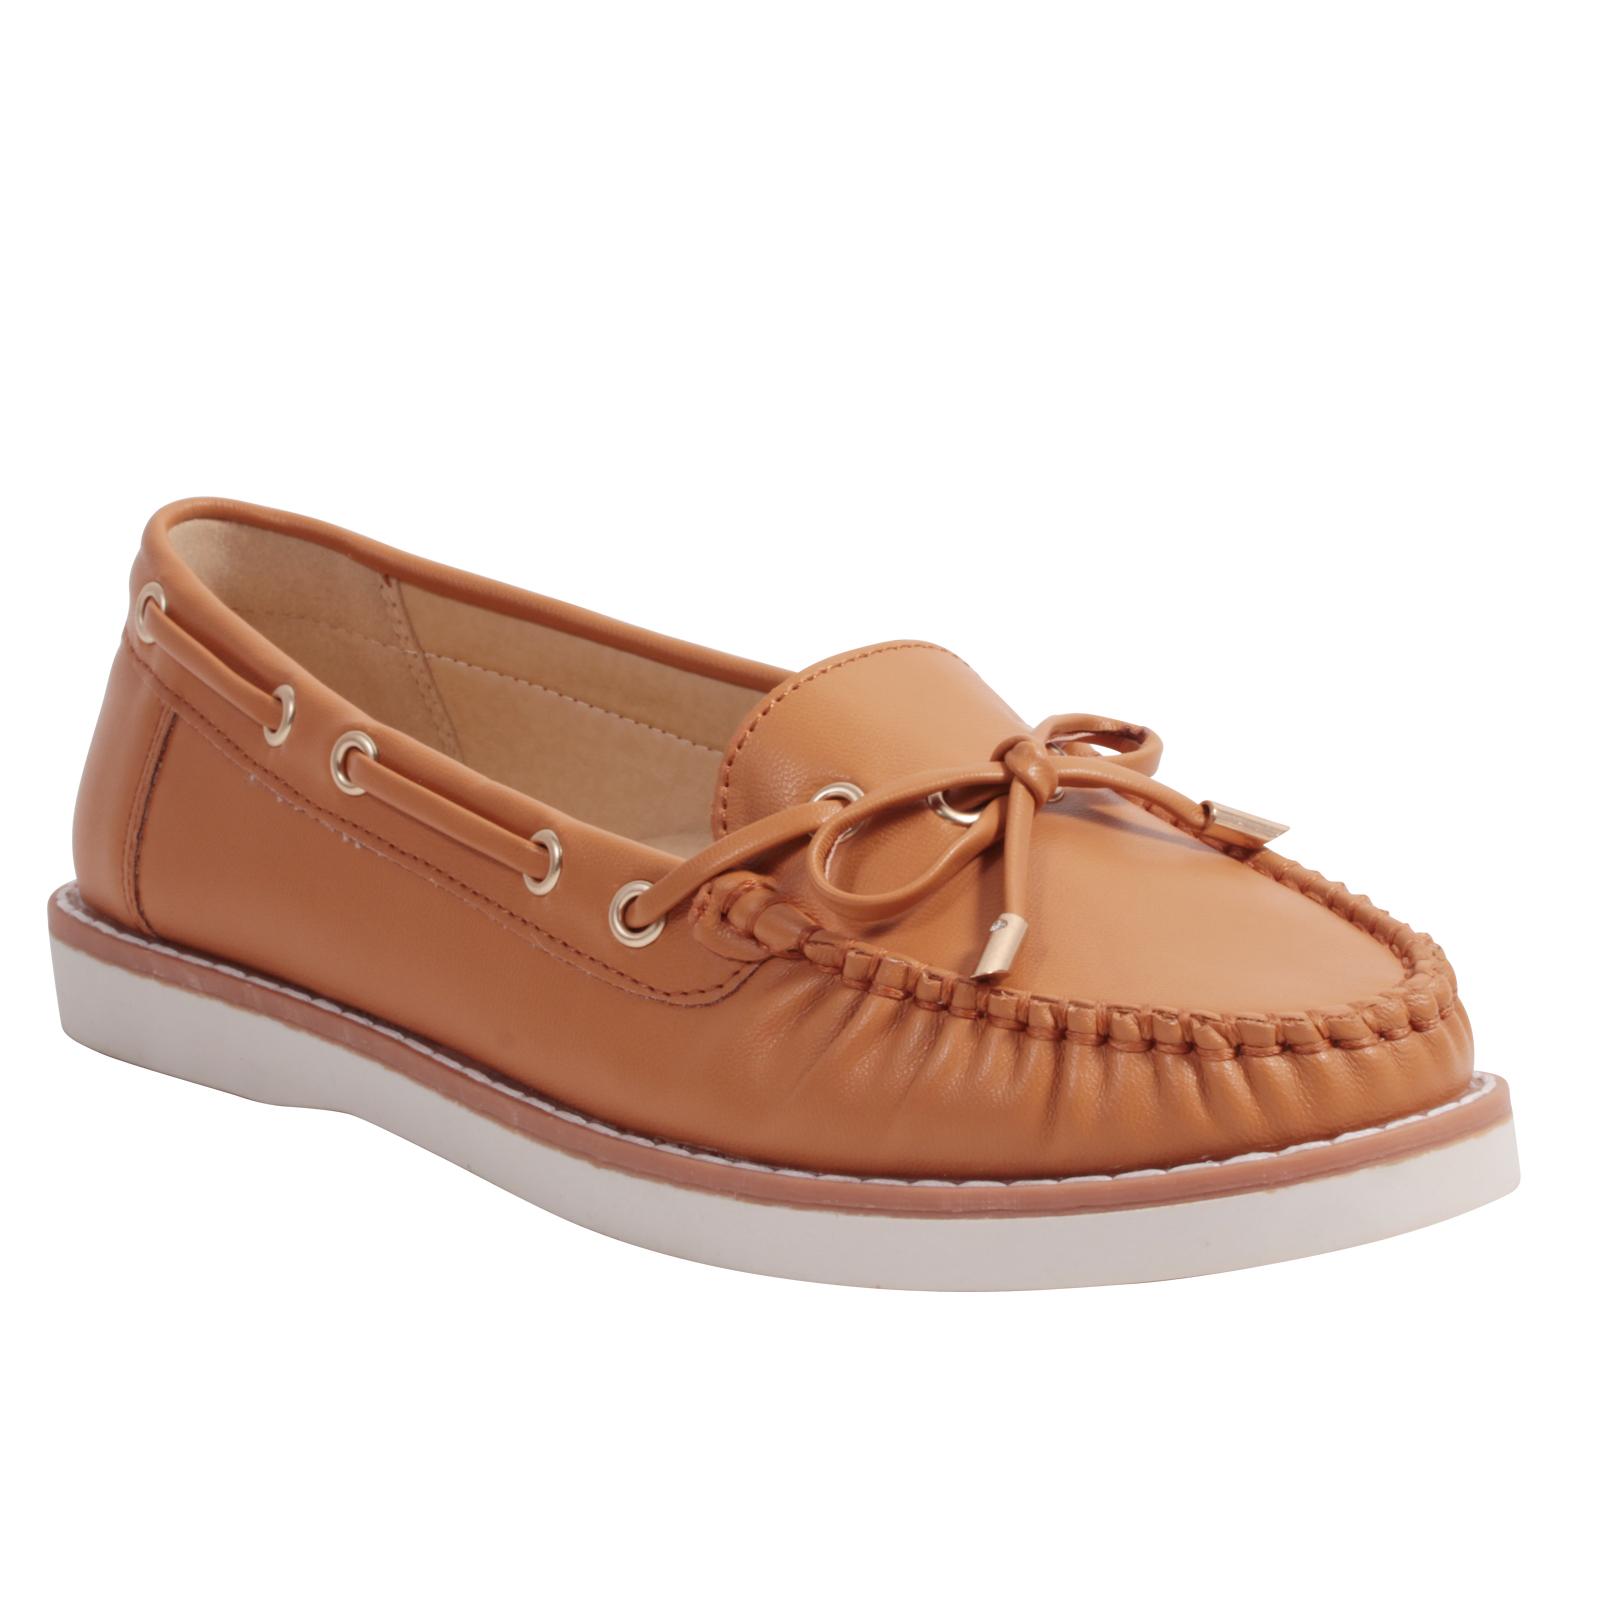 Wanted Women's Mate Moccasin Boat Shoe Tan/White